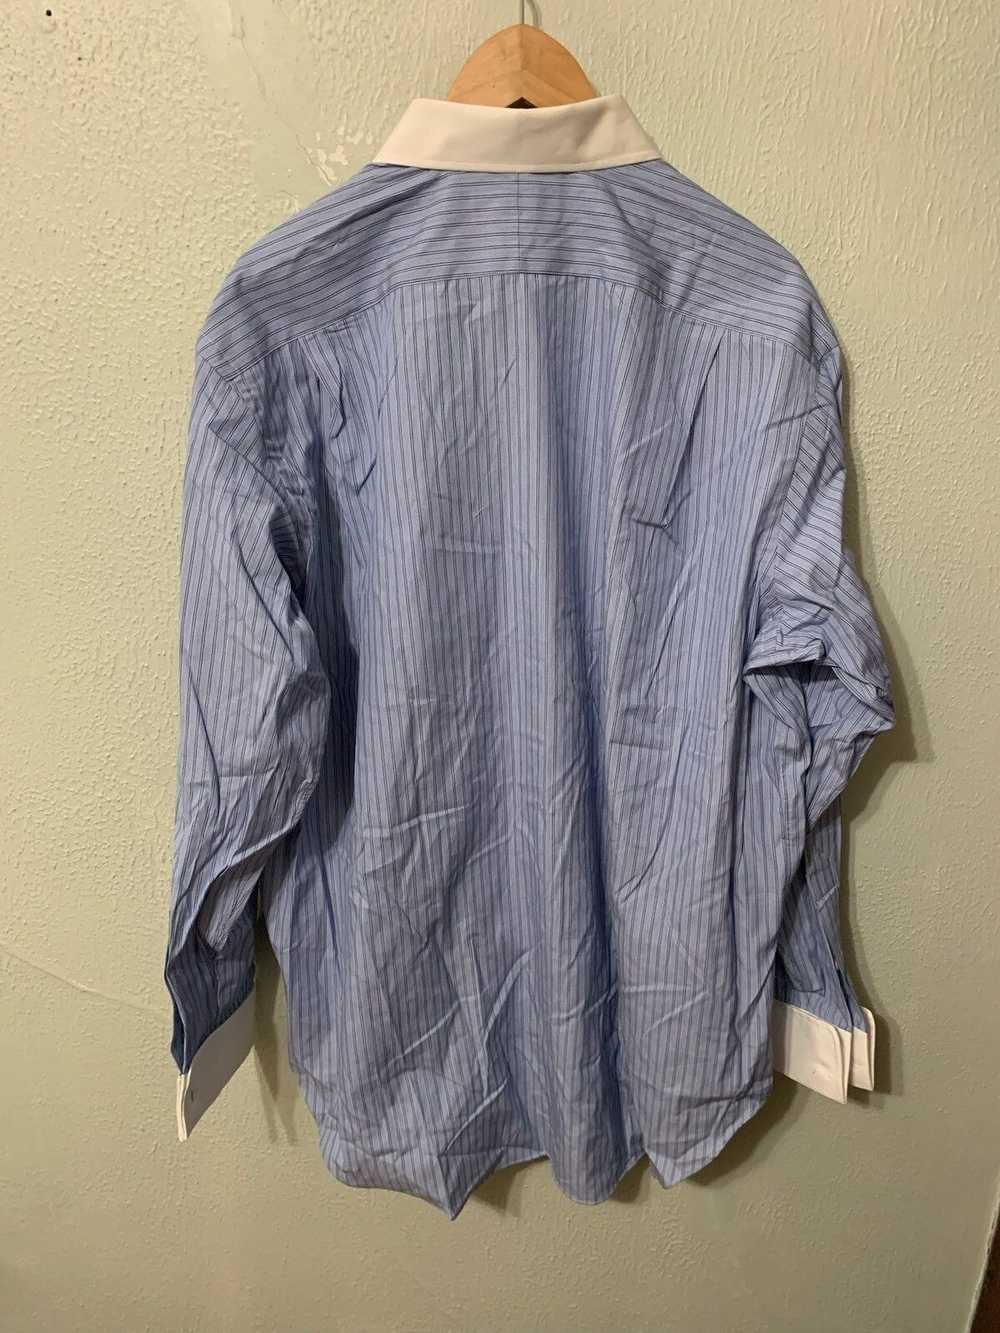 Vintage Vintage Burberry French Cuff Shirt - image 4